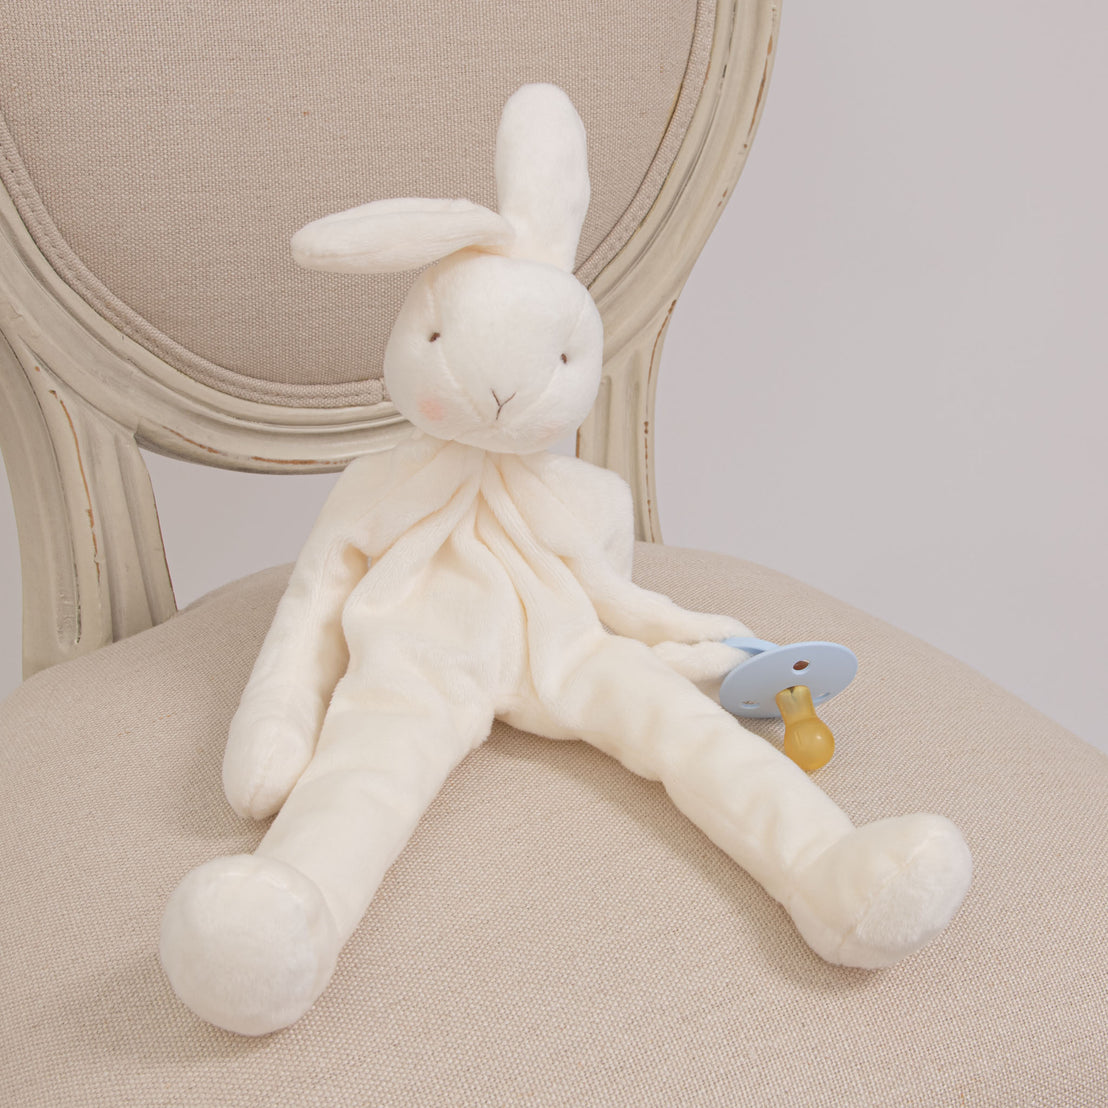 The Owen Silly Bunny Buddy and Pacifier sitting on a chair. It is a stuffed bunny holding a baby blue pacifier.